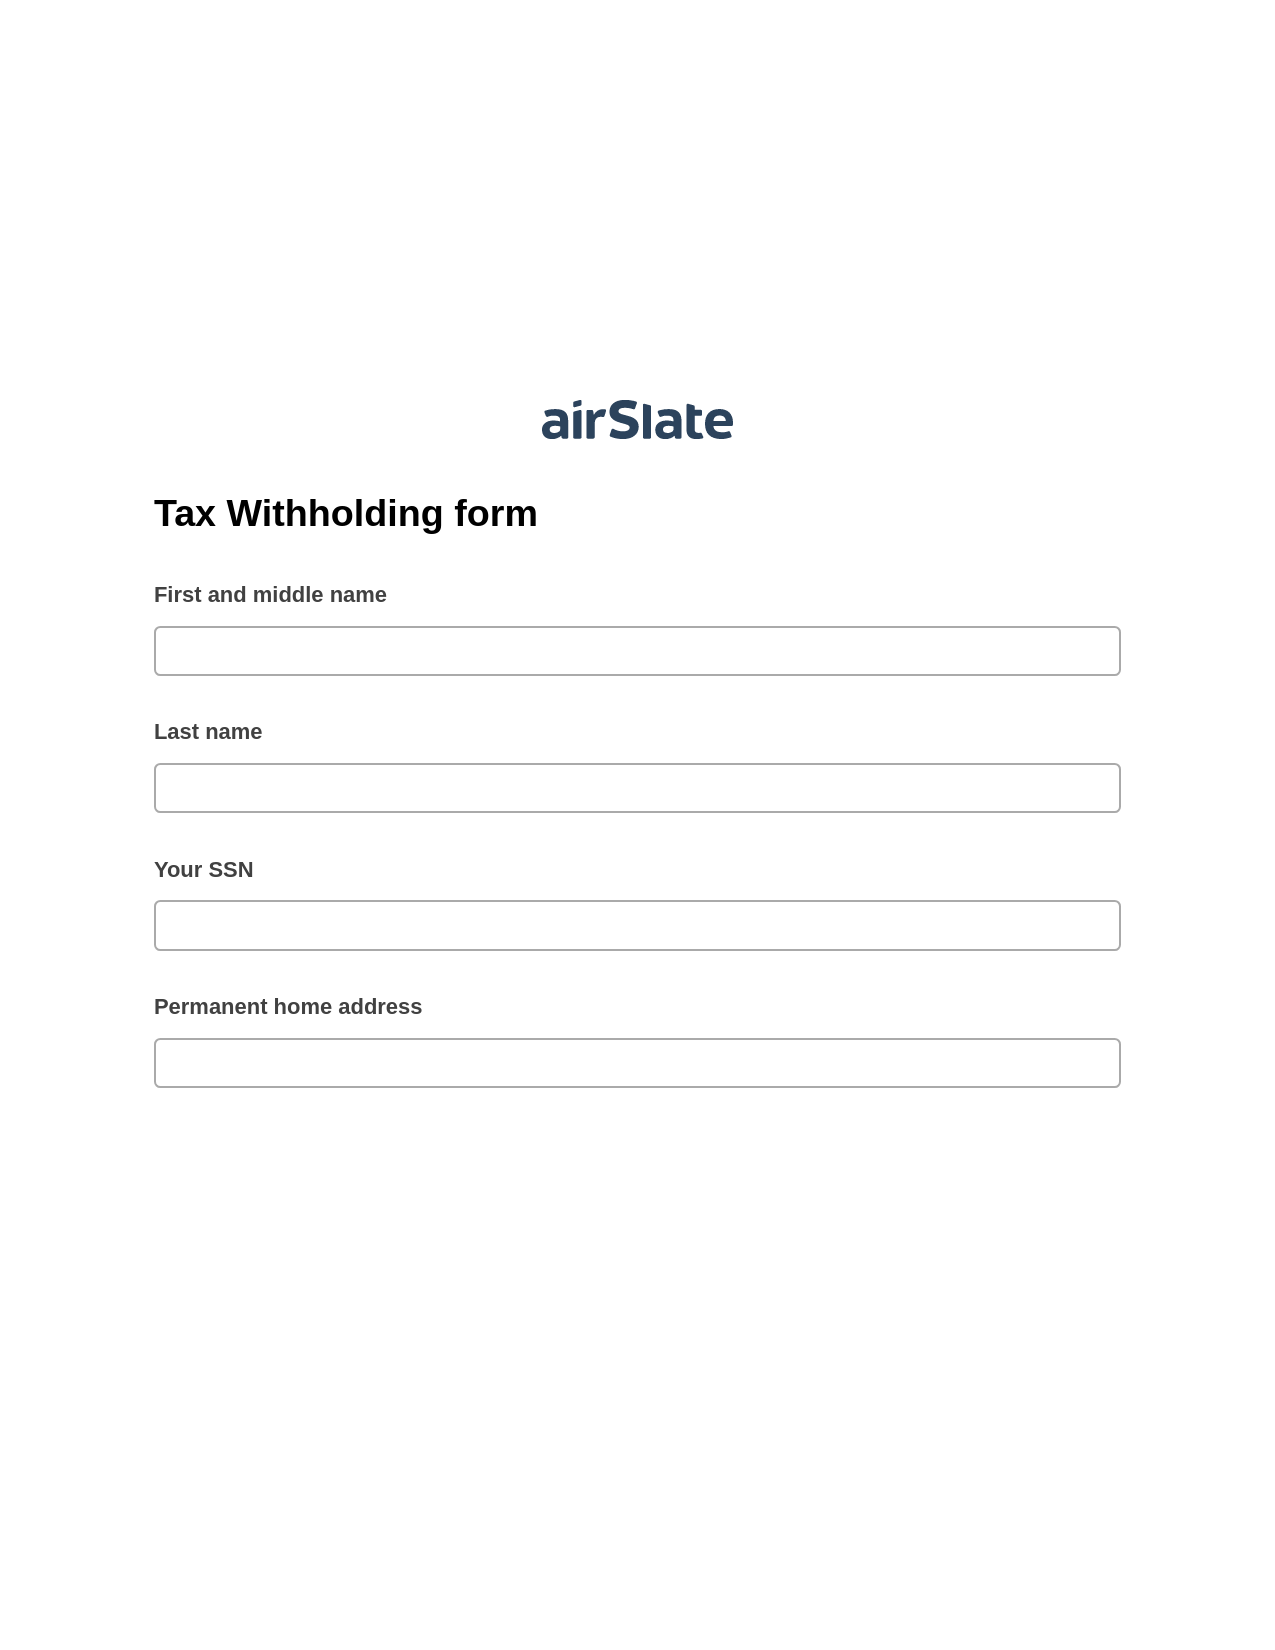 Multirole Tax Withholding form Pre-fill Slate from MS Dynamics 365 Records Bot, Send a Slate with Roles Bot, Dropbox Bot